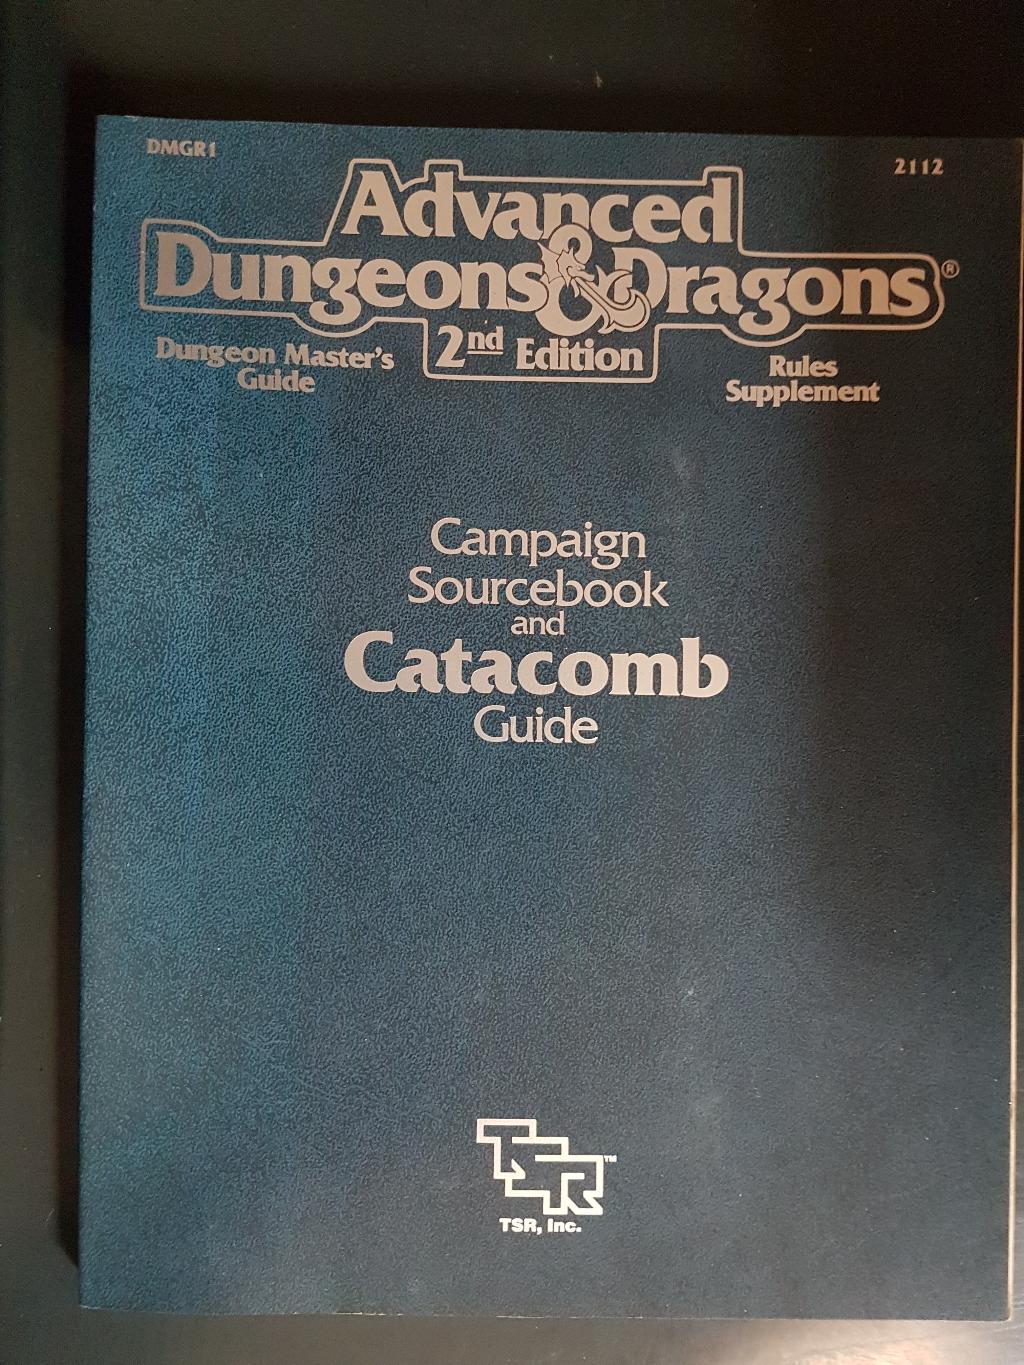 Advanced Dungeons & Dragons - 2nd Edition - Campaign Sourcebook And Catacomb Guide